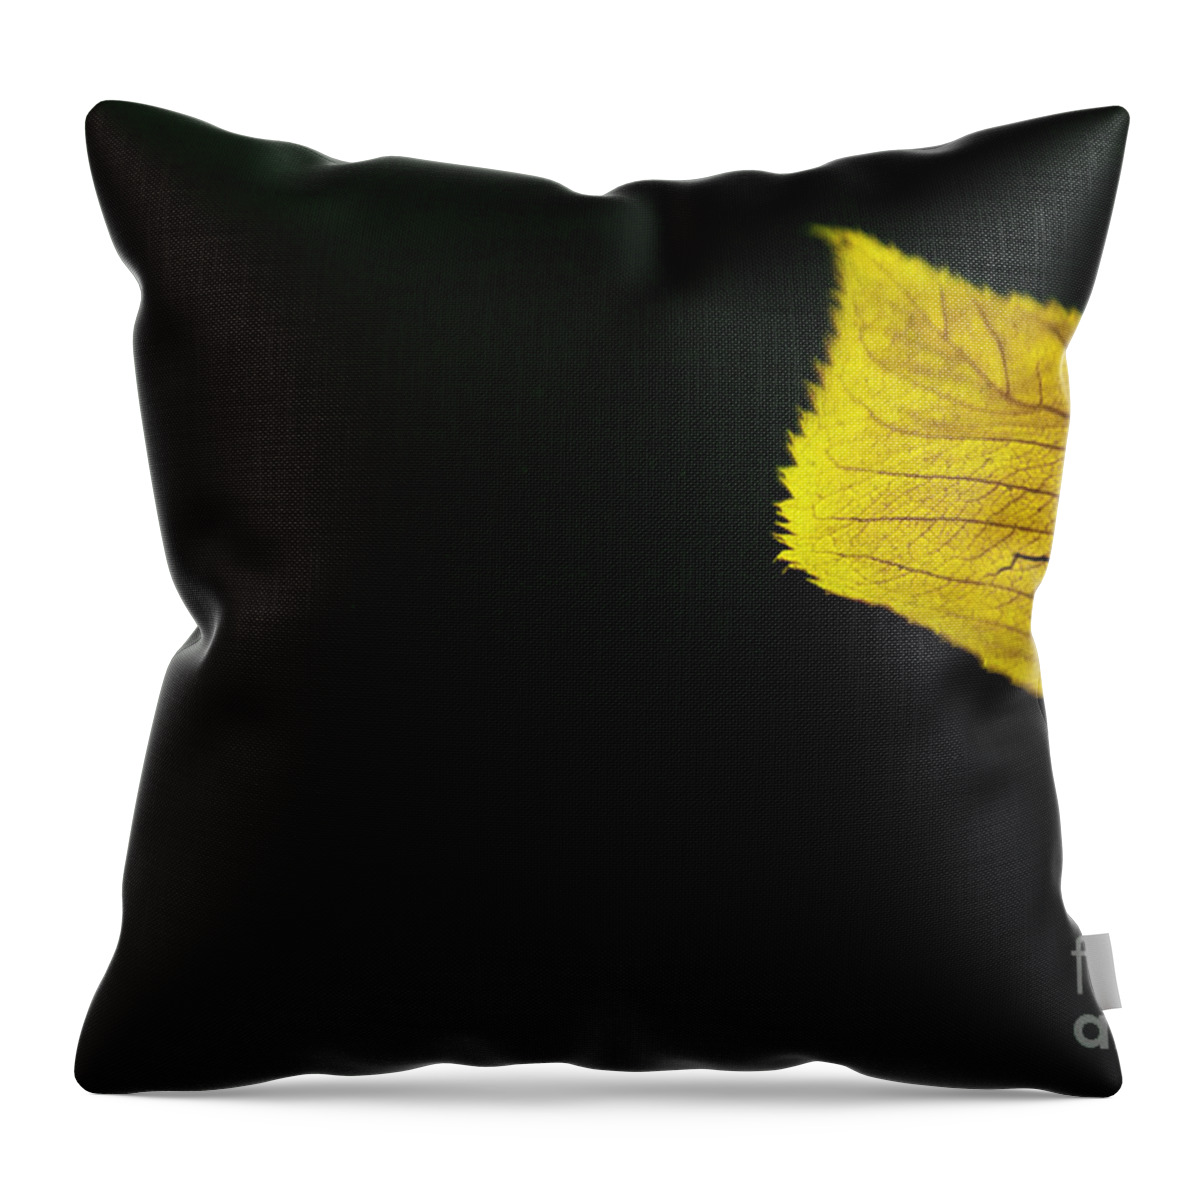 Autumn Throw Pillow featuring the photograph Leaf by Eena Bo